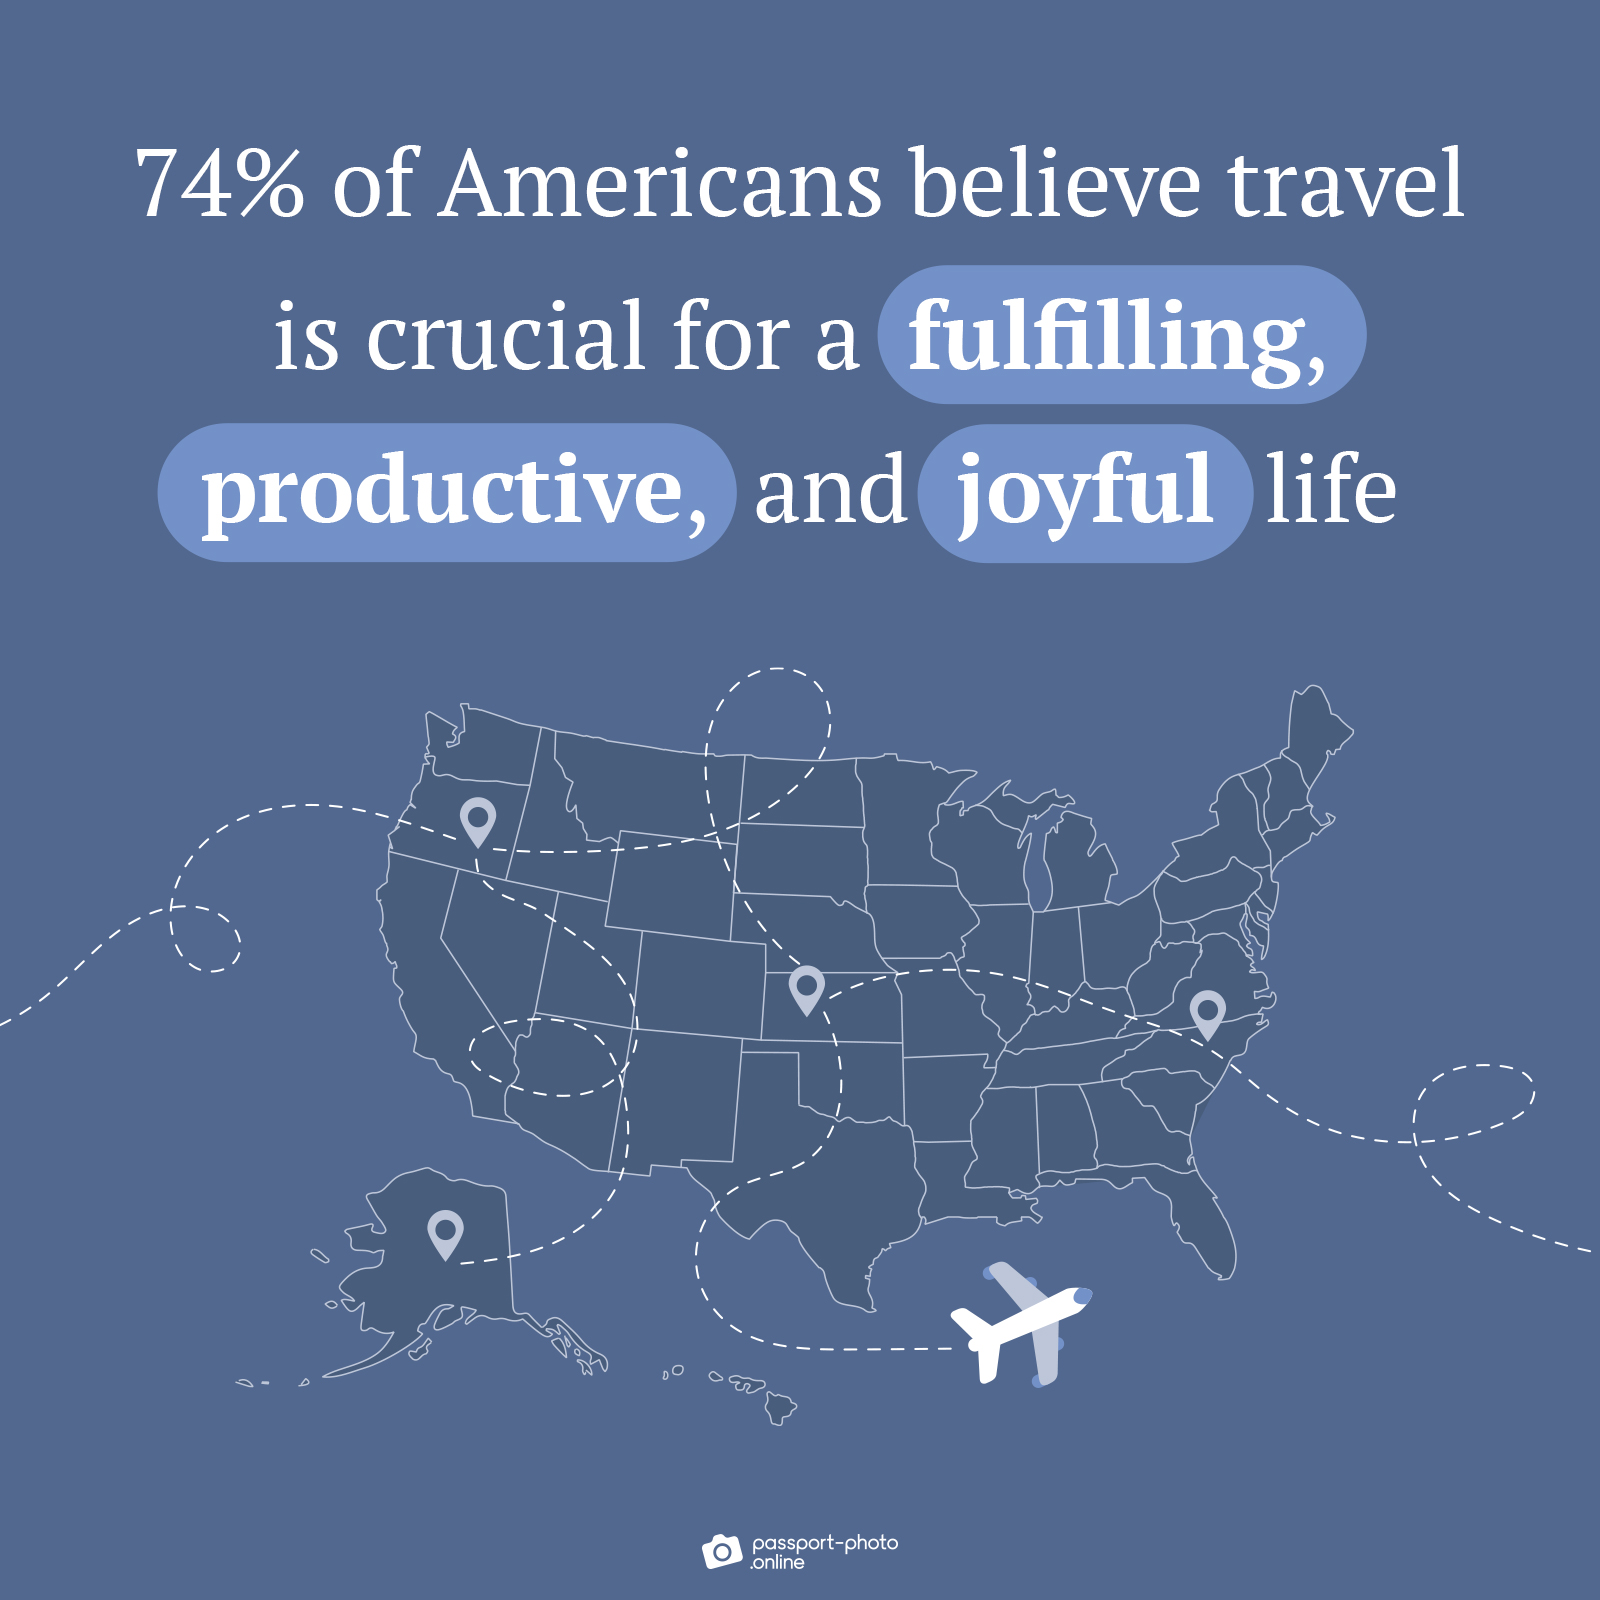 74% of Americans believe travel is crucial for a fulfilling, productive, and joyful life